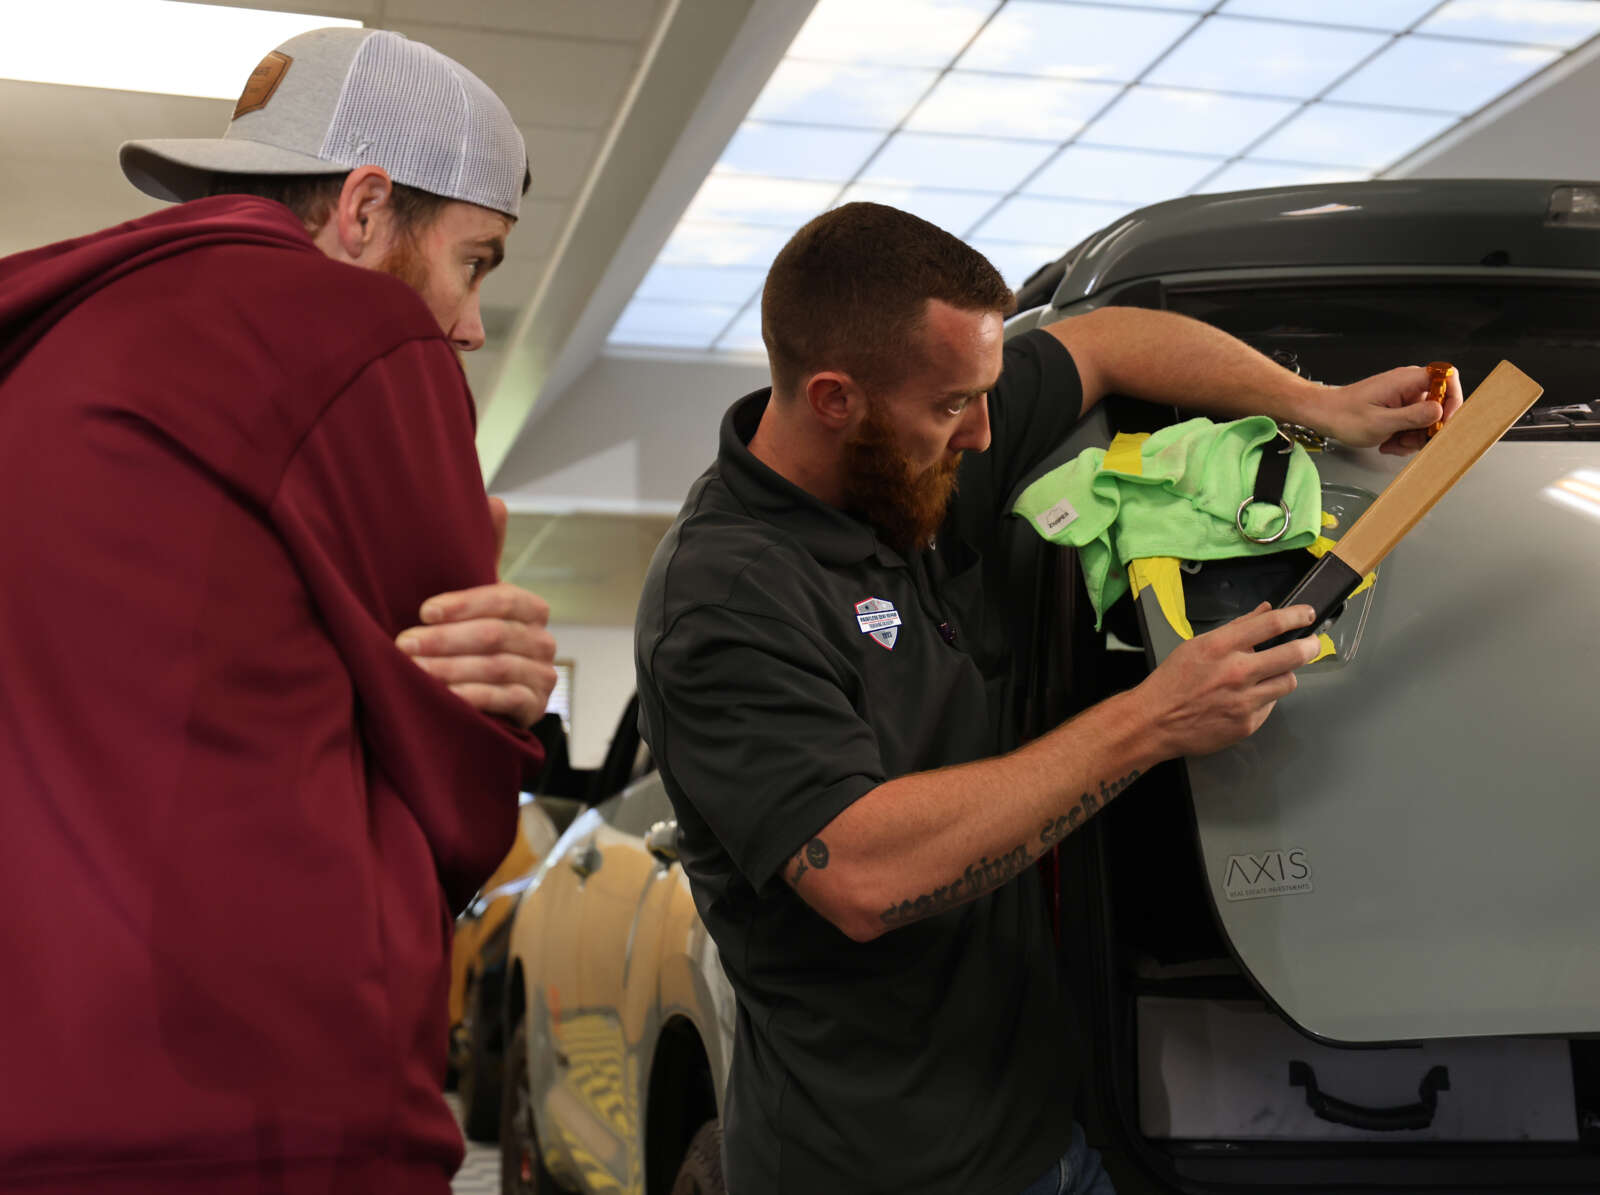 Instructor showing a student how to remove a dent on the hood of a vehicle.